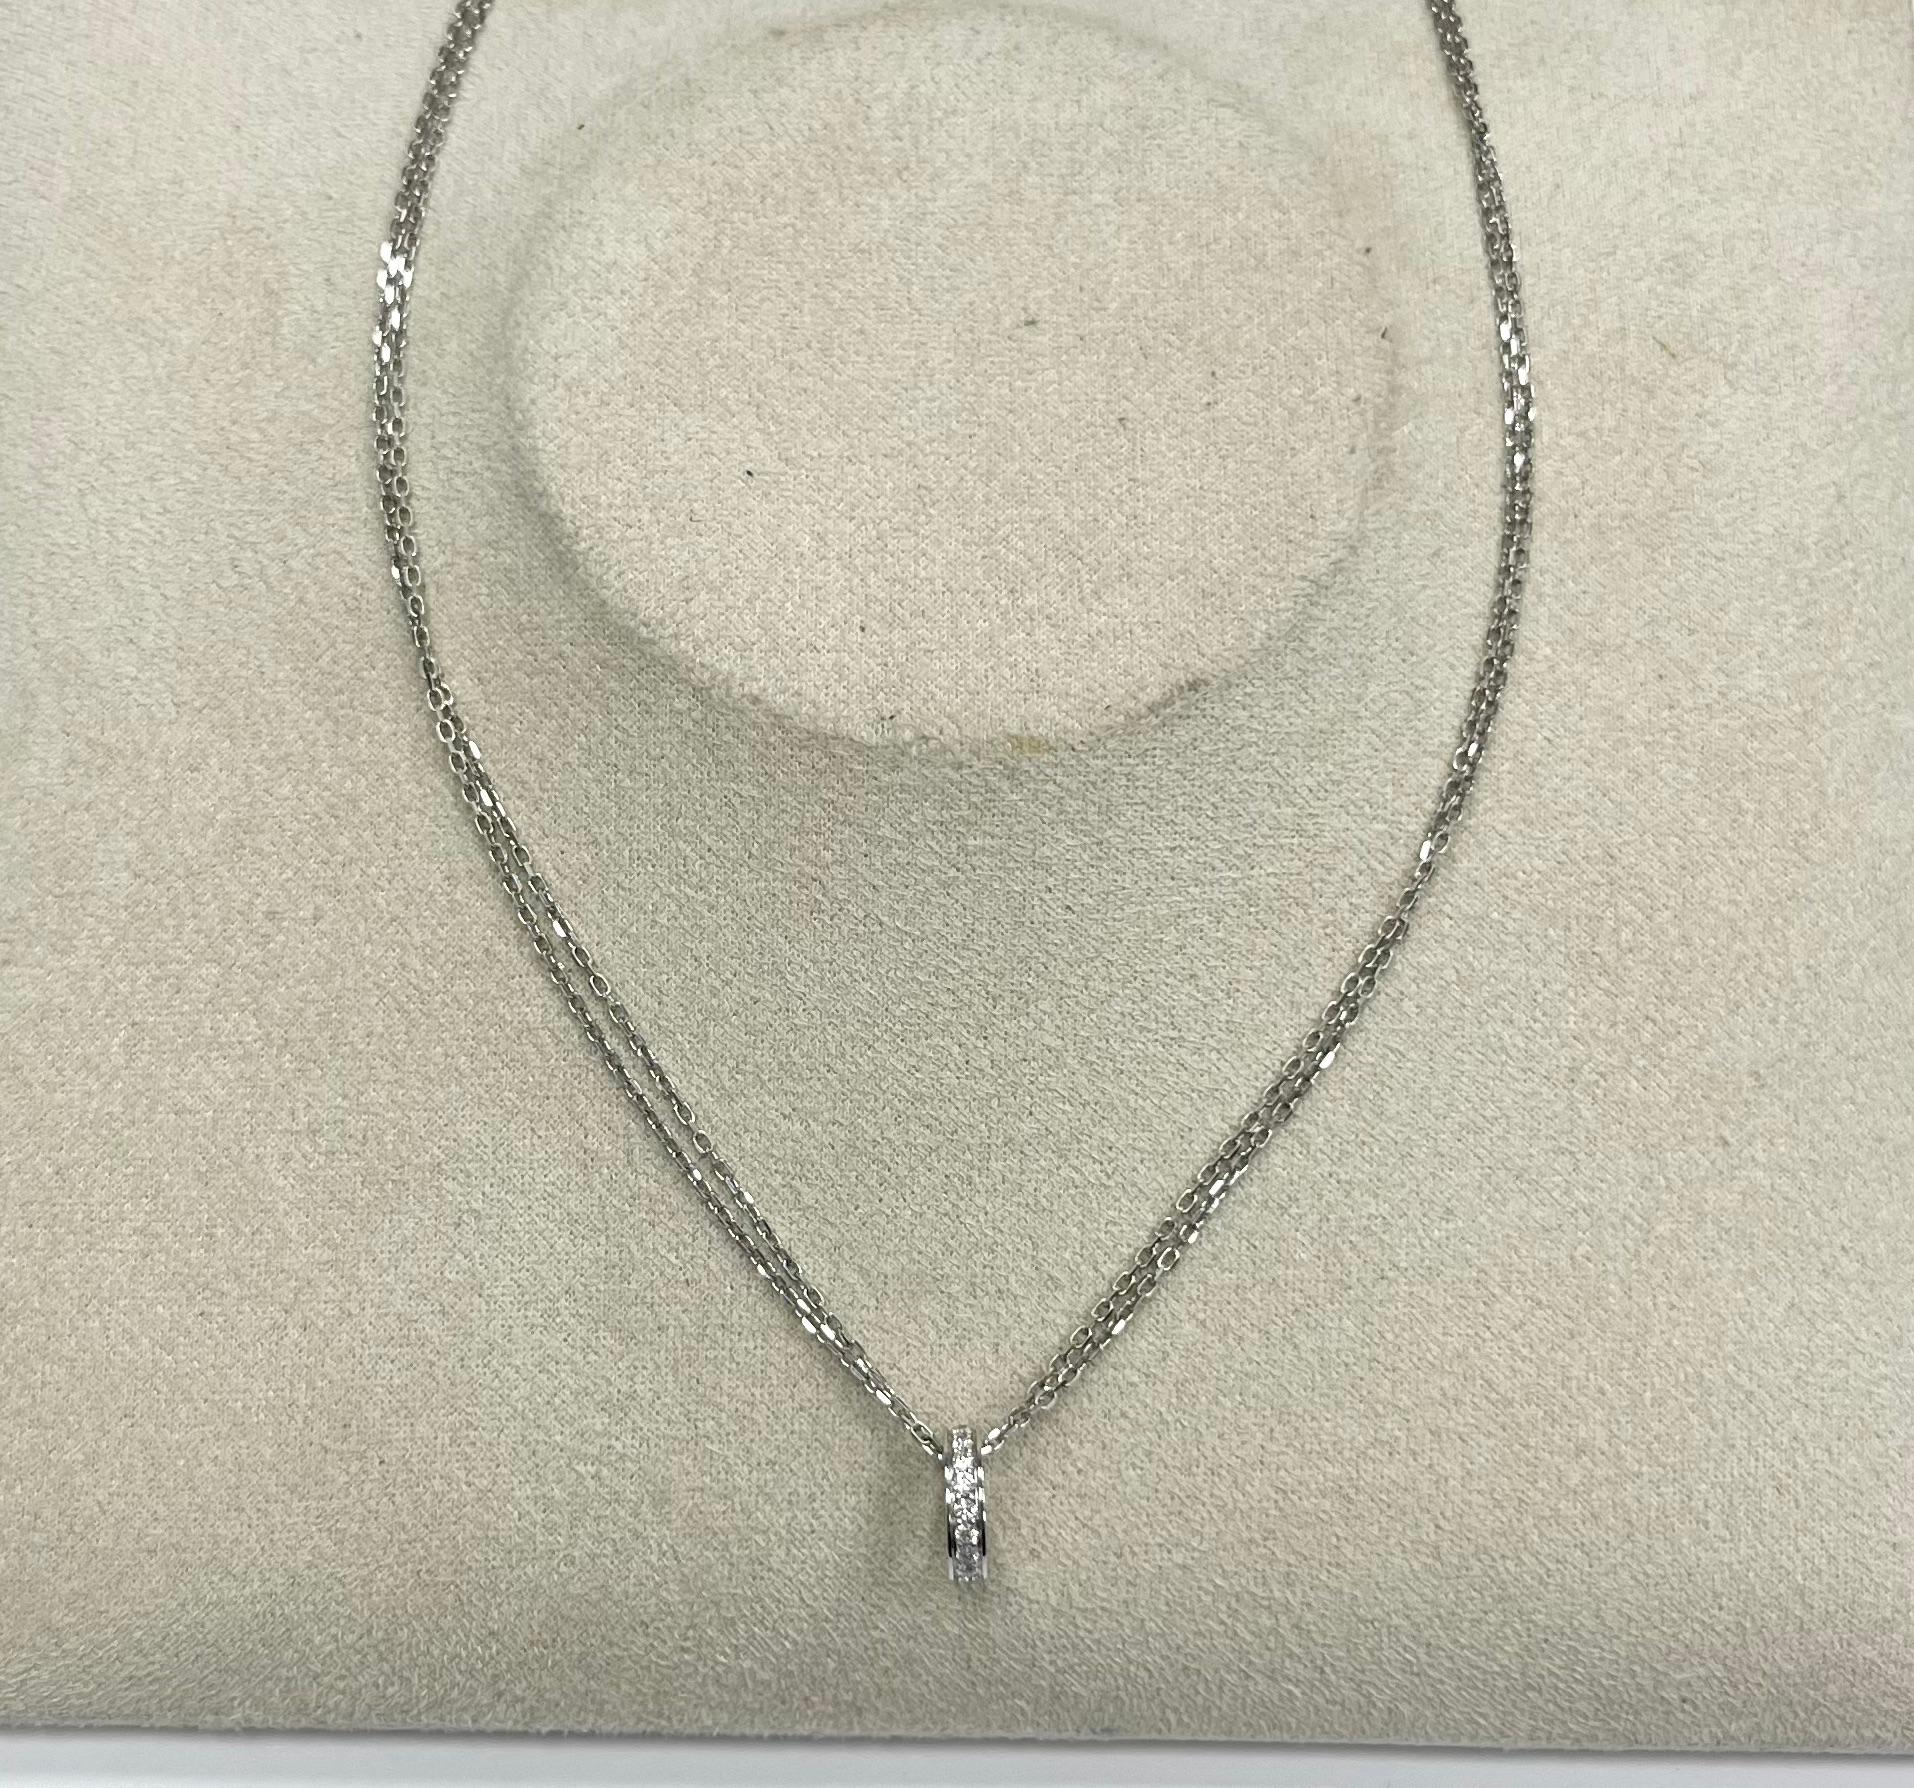 Cartier 18K white gold diamond circle pendant with a double chain necklace
Marked: Cartier Au750 and serial number
Length: 15.25